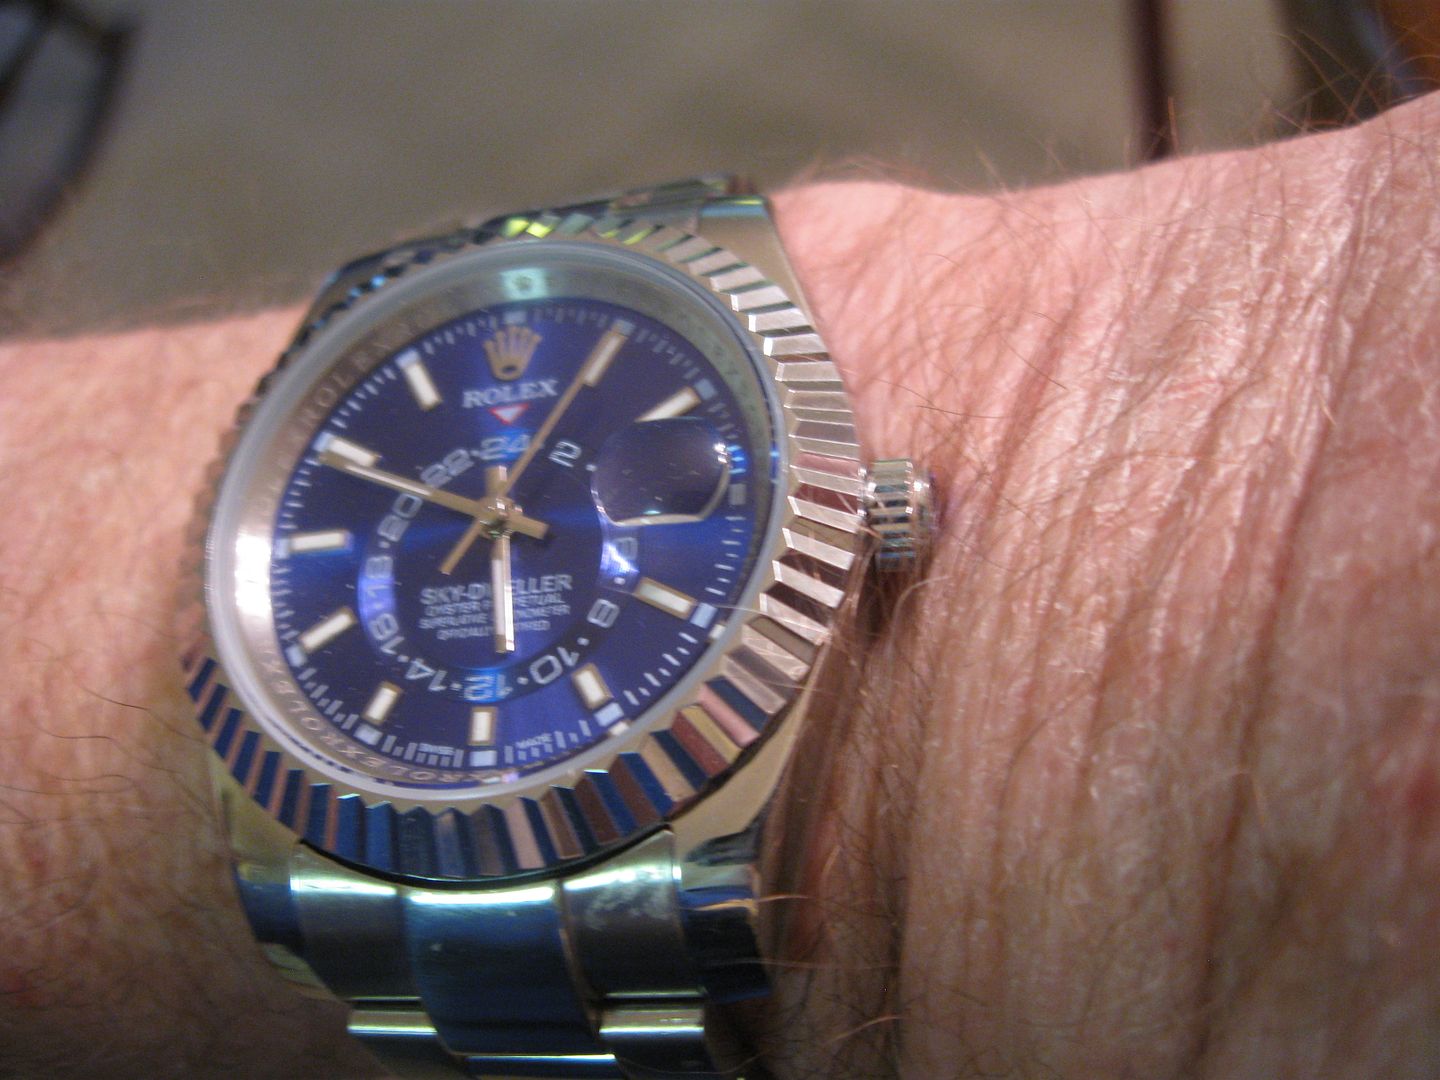 ROLEXES-%205513%20ND%20&%20CHEAP.SKYDWEL